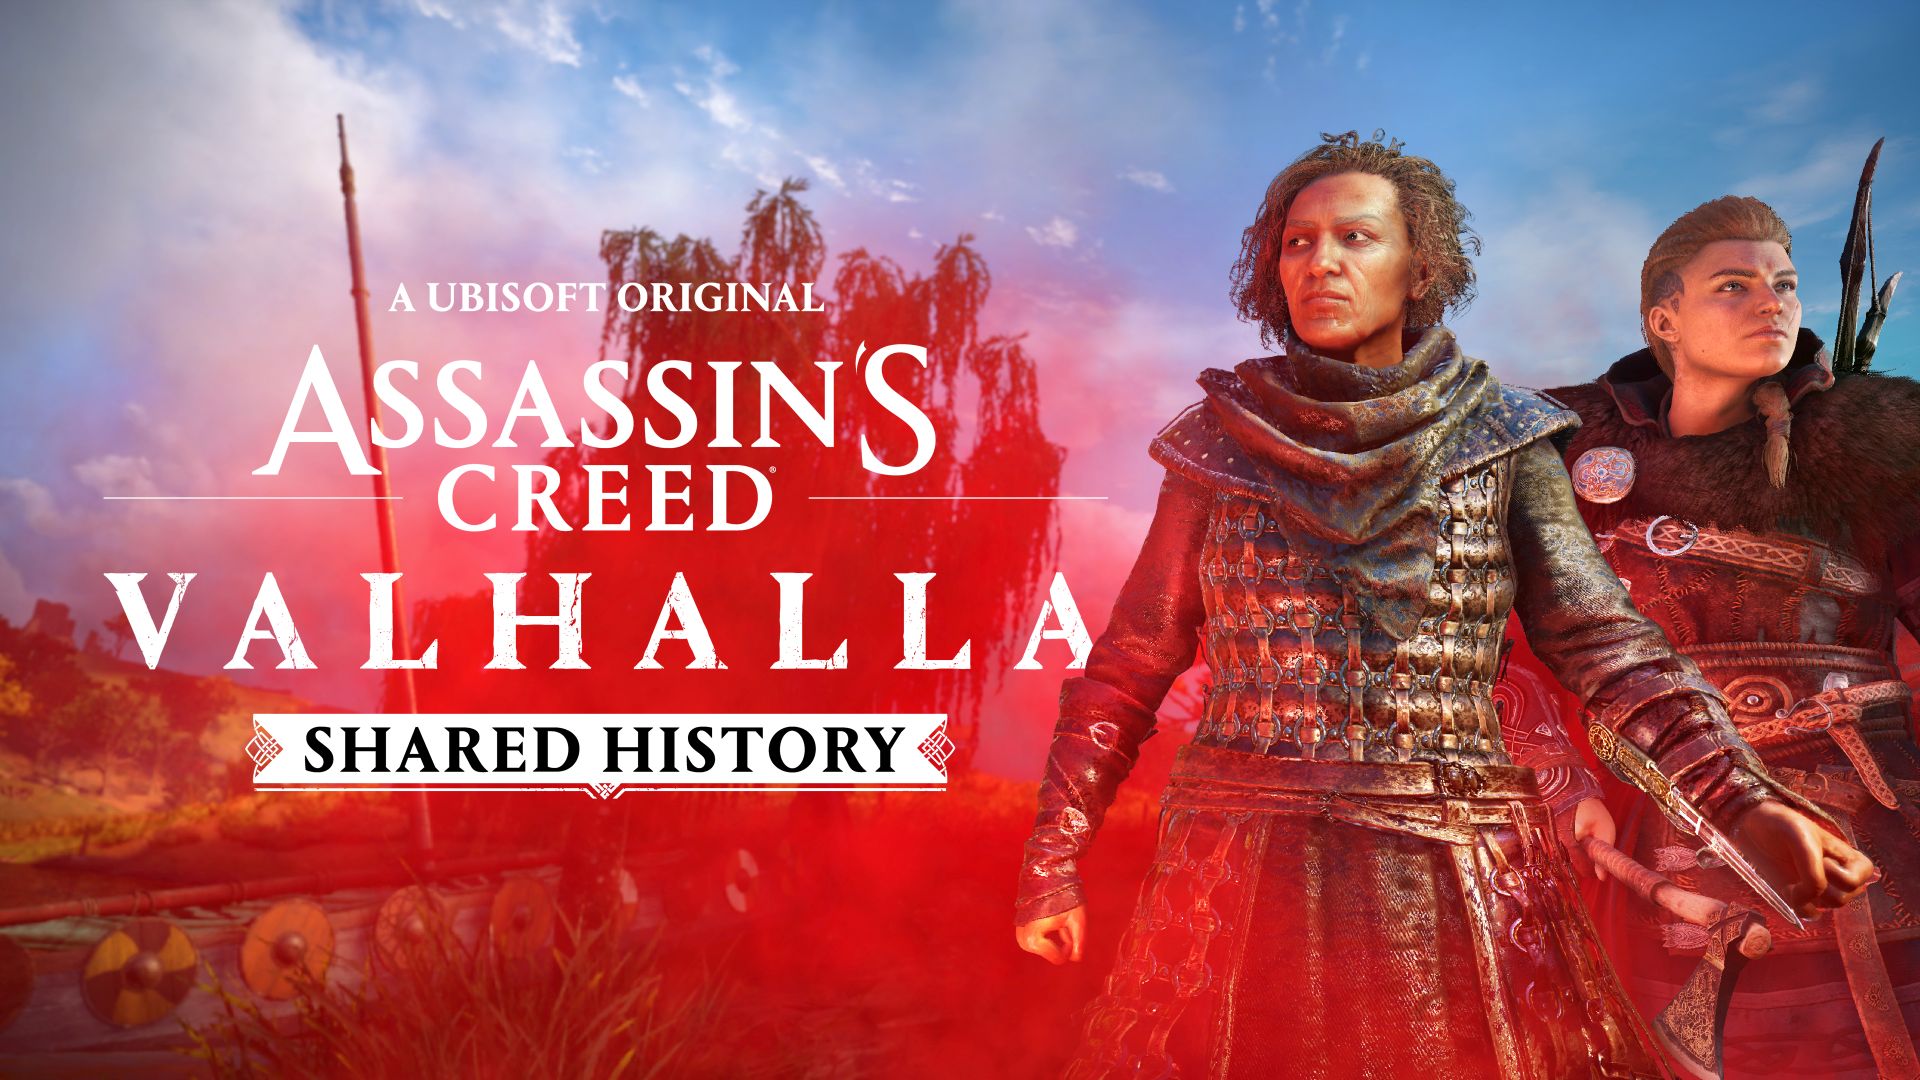 Assassin's Creed Valhalla's Final Content Update, The Last Chapter